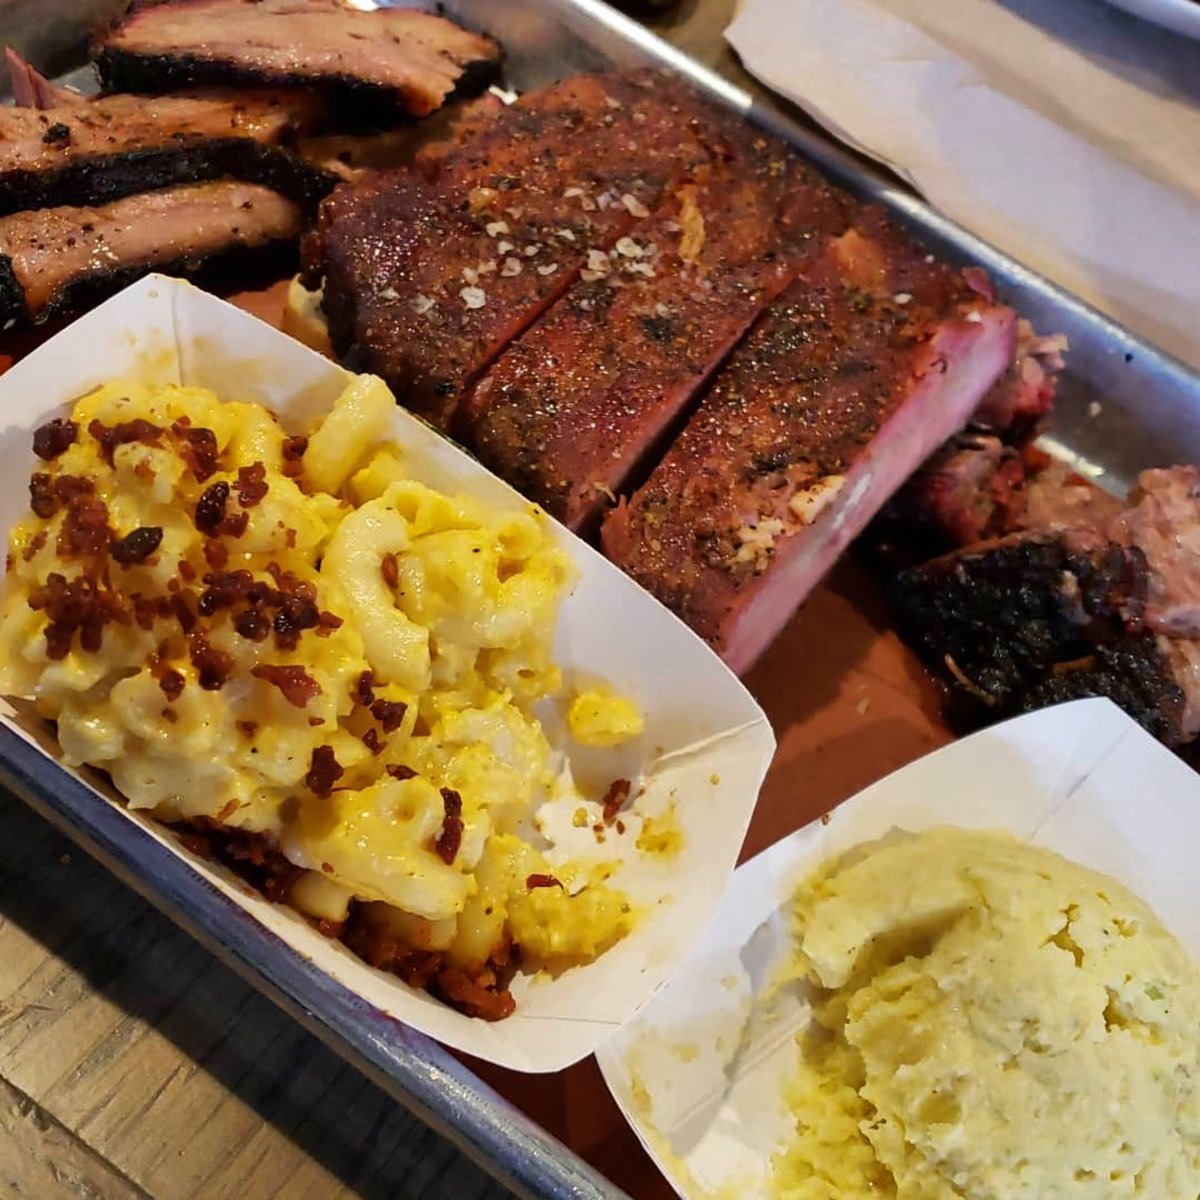 “ Just when I had given up on finding good bbq in New Orleans, @centralcitybbq_ restored my hope!” - Bob
❤️🐷❤️

#nolaeats #neworleans #wherenolaeats #noladining